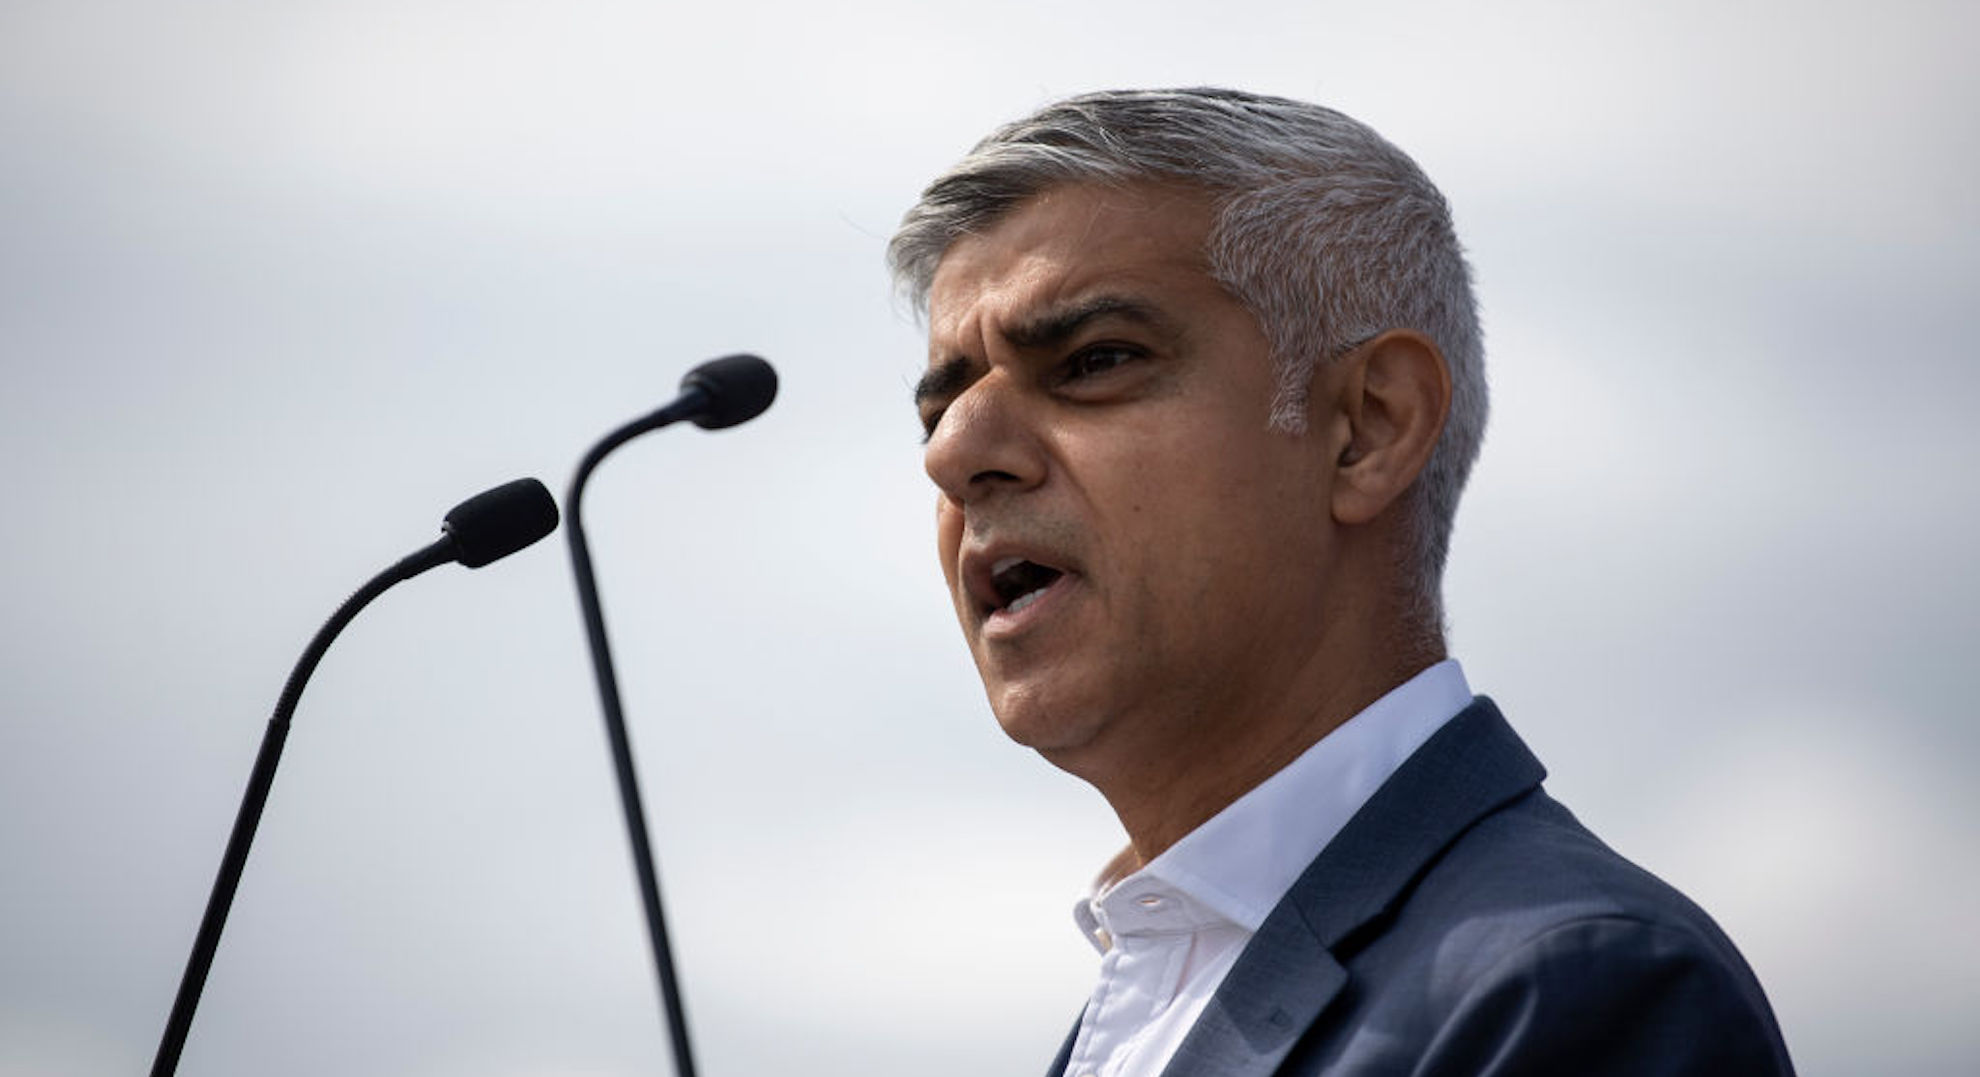 Mayor Sadiq Khan speaking at a podium for the 10th anniversary of the Olympics with a microphone in his face